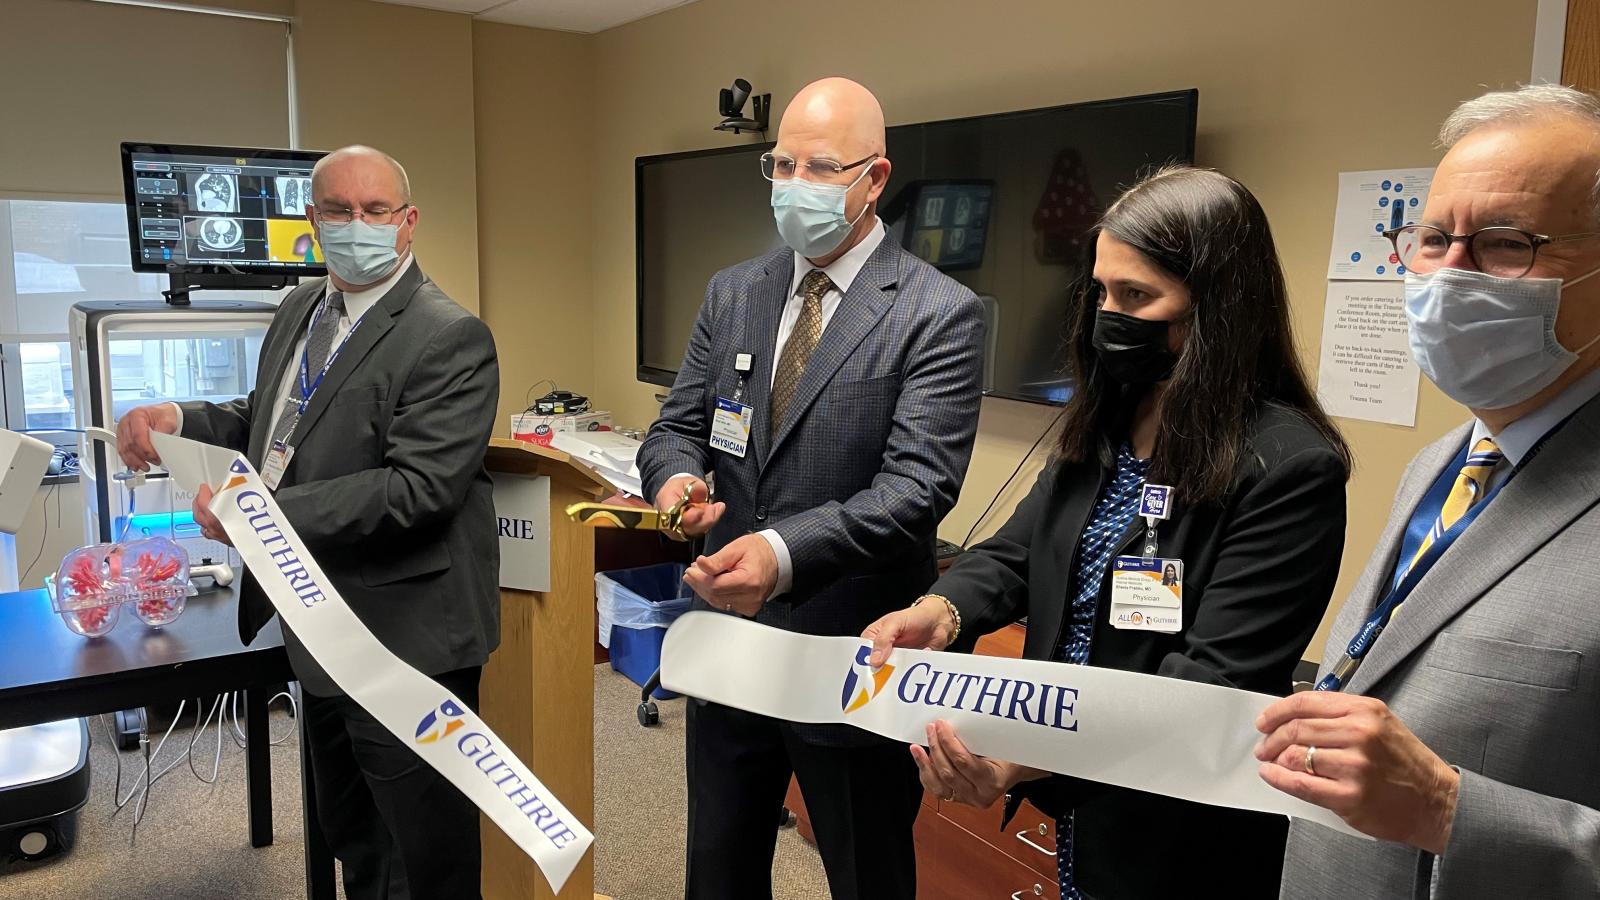 Guthrie is First in the Region to Offer Robotic Bronchoscope